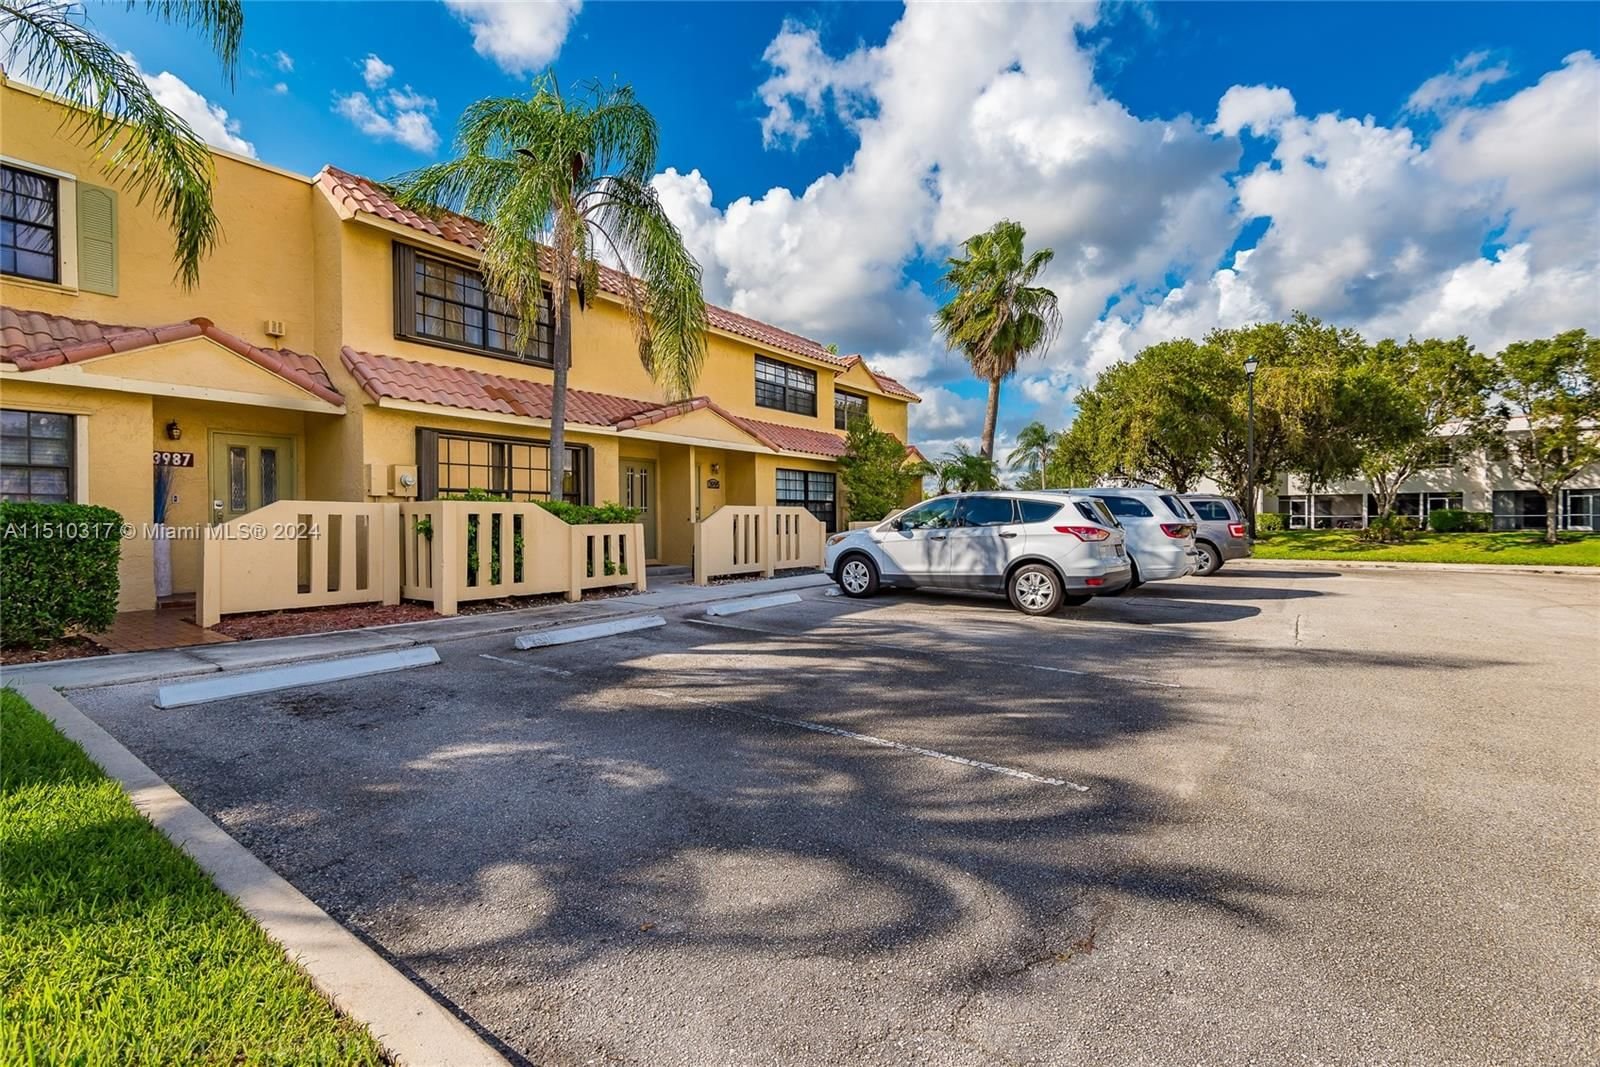 Real estate property located at 3995 94th Way, Broward County, WELLEBY UNIT SIX, Sunrise, FL